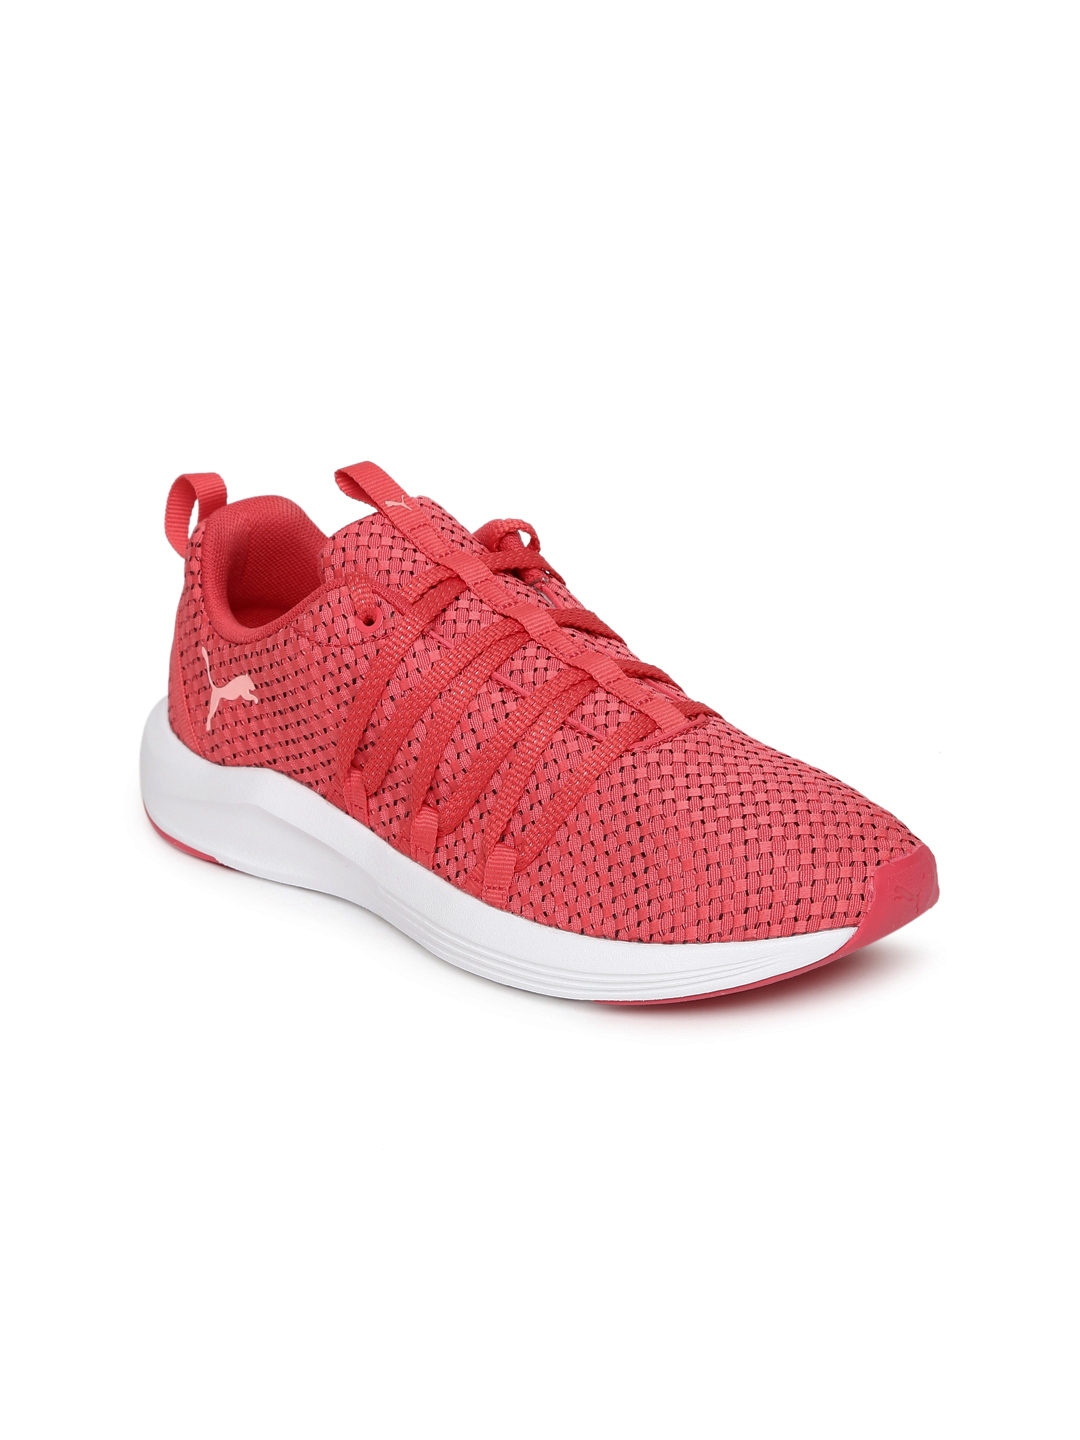 Buy Puma Women Pink Prowl Alt Weave Wn S Running Shoes - Sports Shoes ...